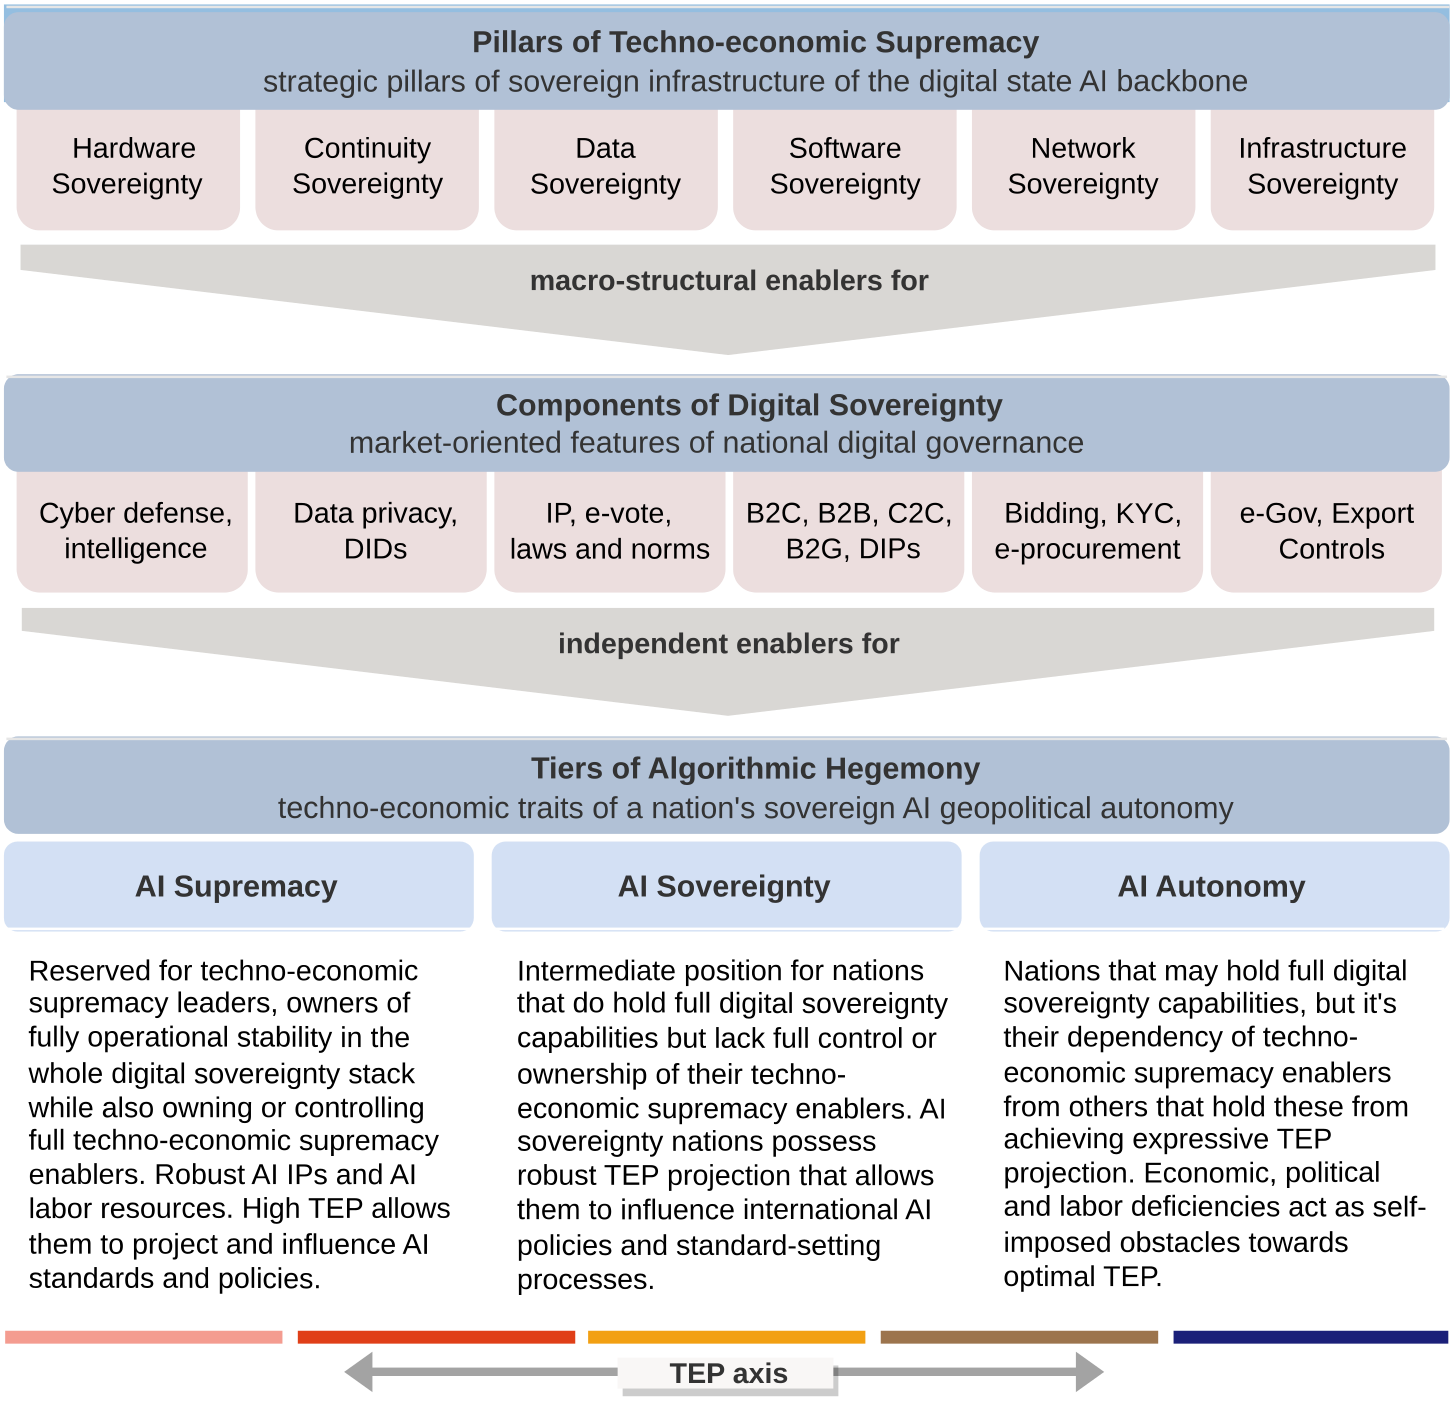 The Stratified Hierarchy Model of Techno-Economic Supremacy, Digital Sovereignty, and Algorithmic Hegemony